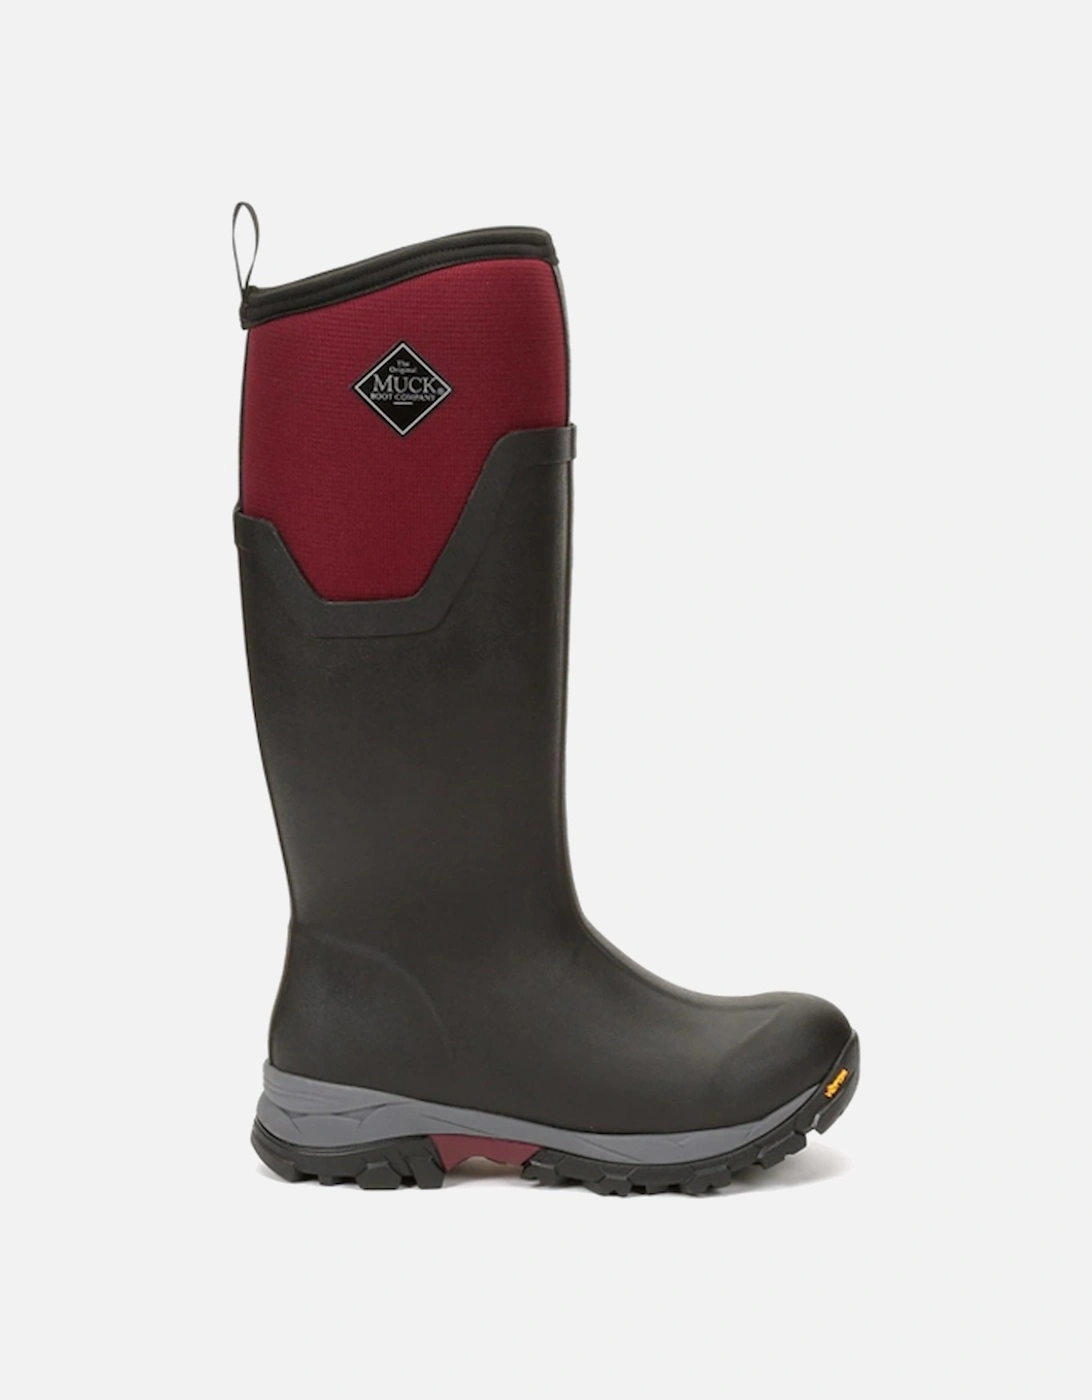 Muck Boots Women's Arctic Ice Tall Wellies Black/Maroon DFS, 9 of 8